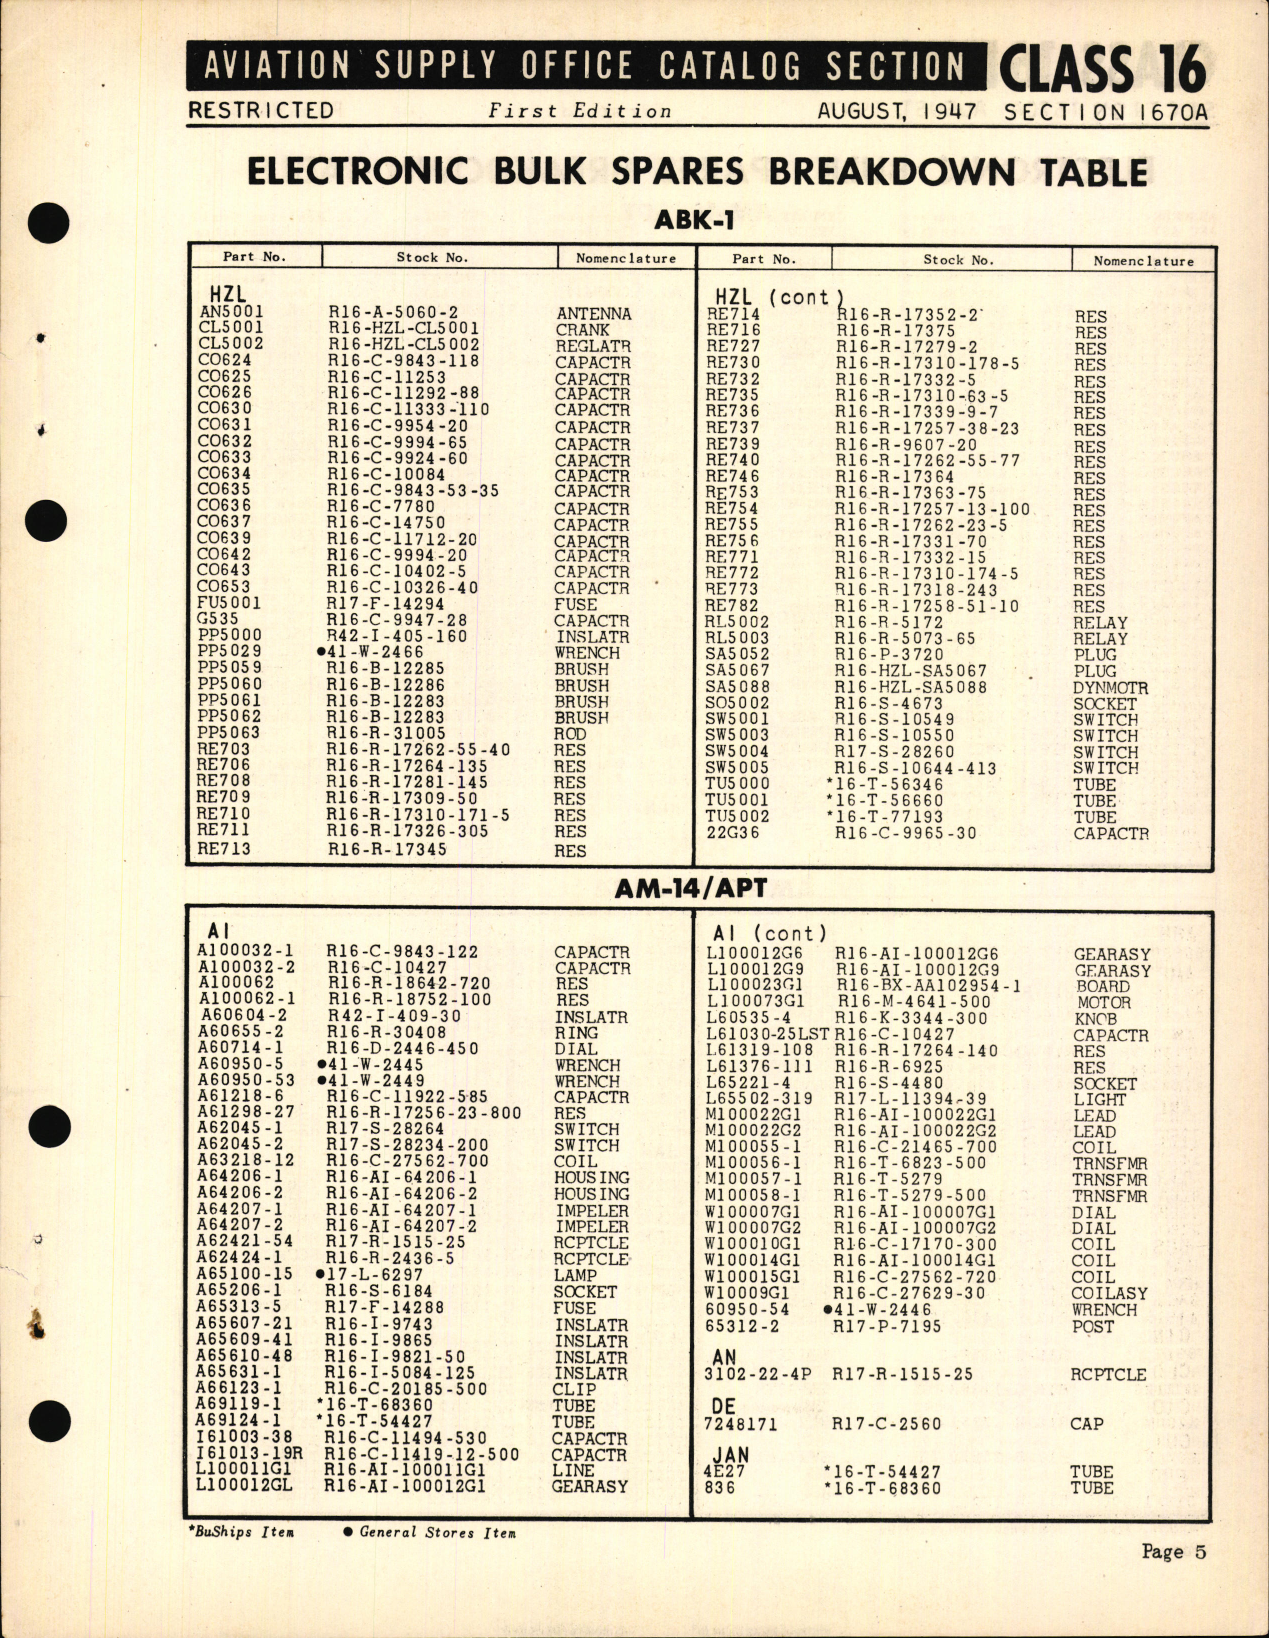 Sample page 5 from AirCorps Library document: Electronic Bulk Spares Breakdown Table